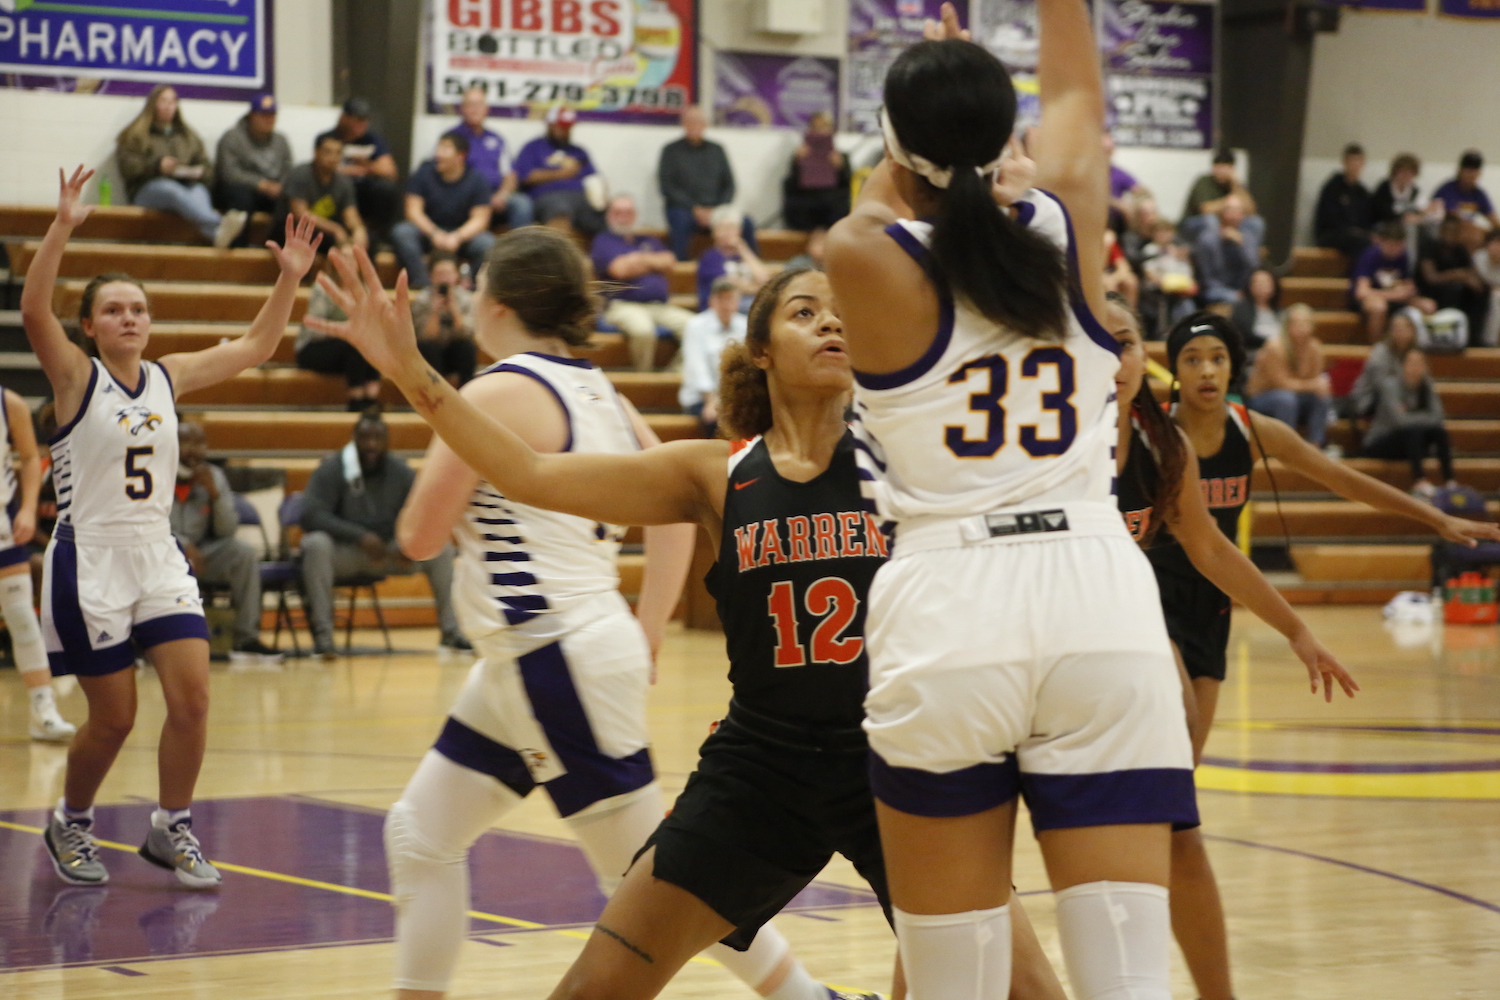 Warren Lady Jacks fall to Mayflower Tuesday night on the road